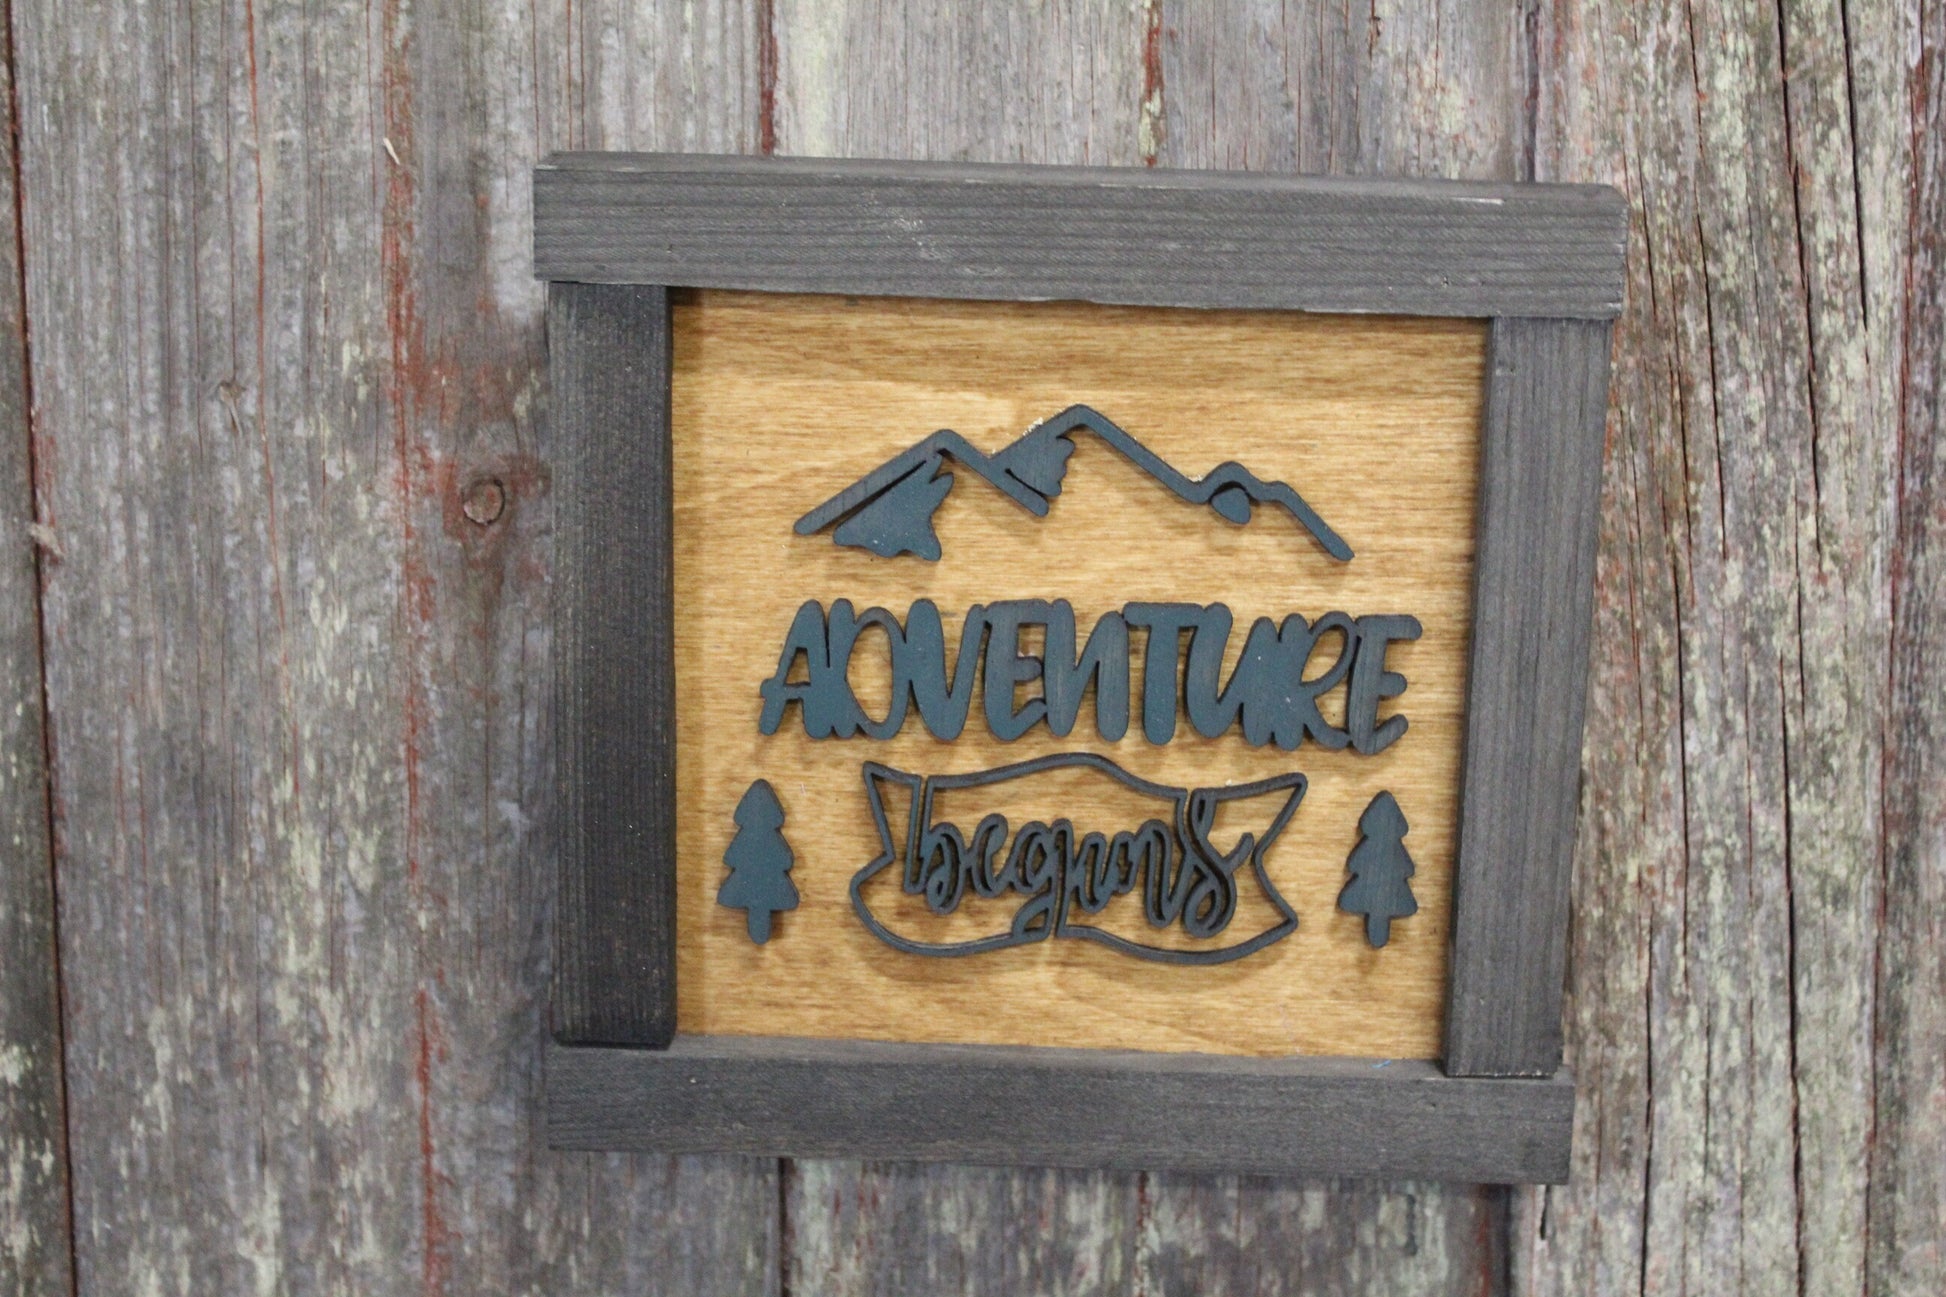 Adventure Begins 3D Raised Text Rustic Mountain Pine Trees Brown Cabin Primitive Script Text Room Wall Décor Decoration Camping Travel